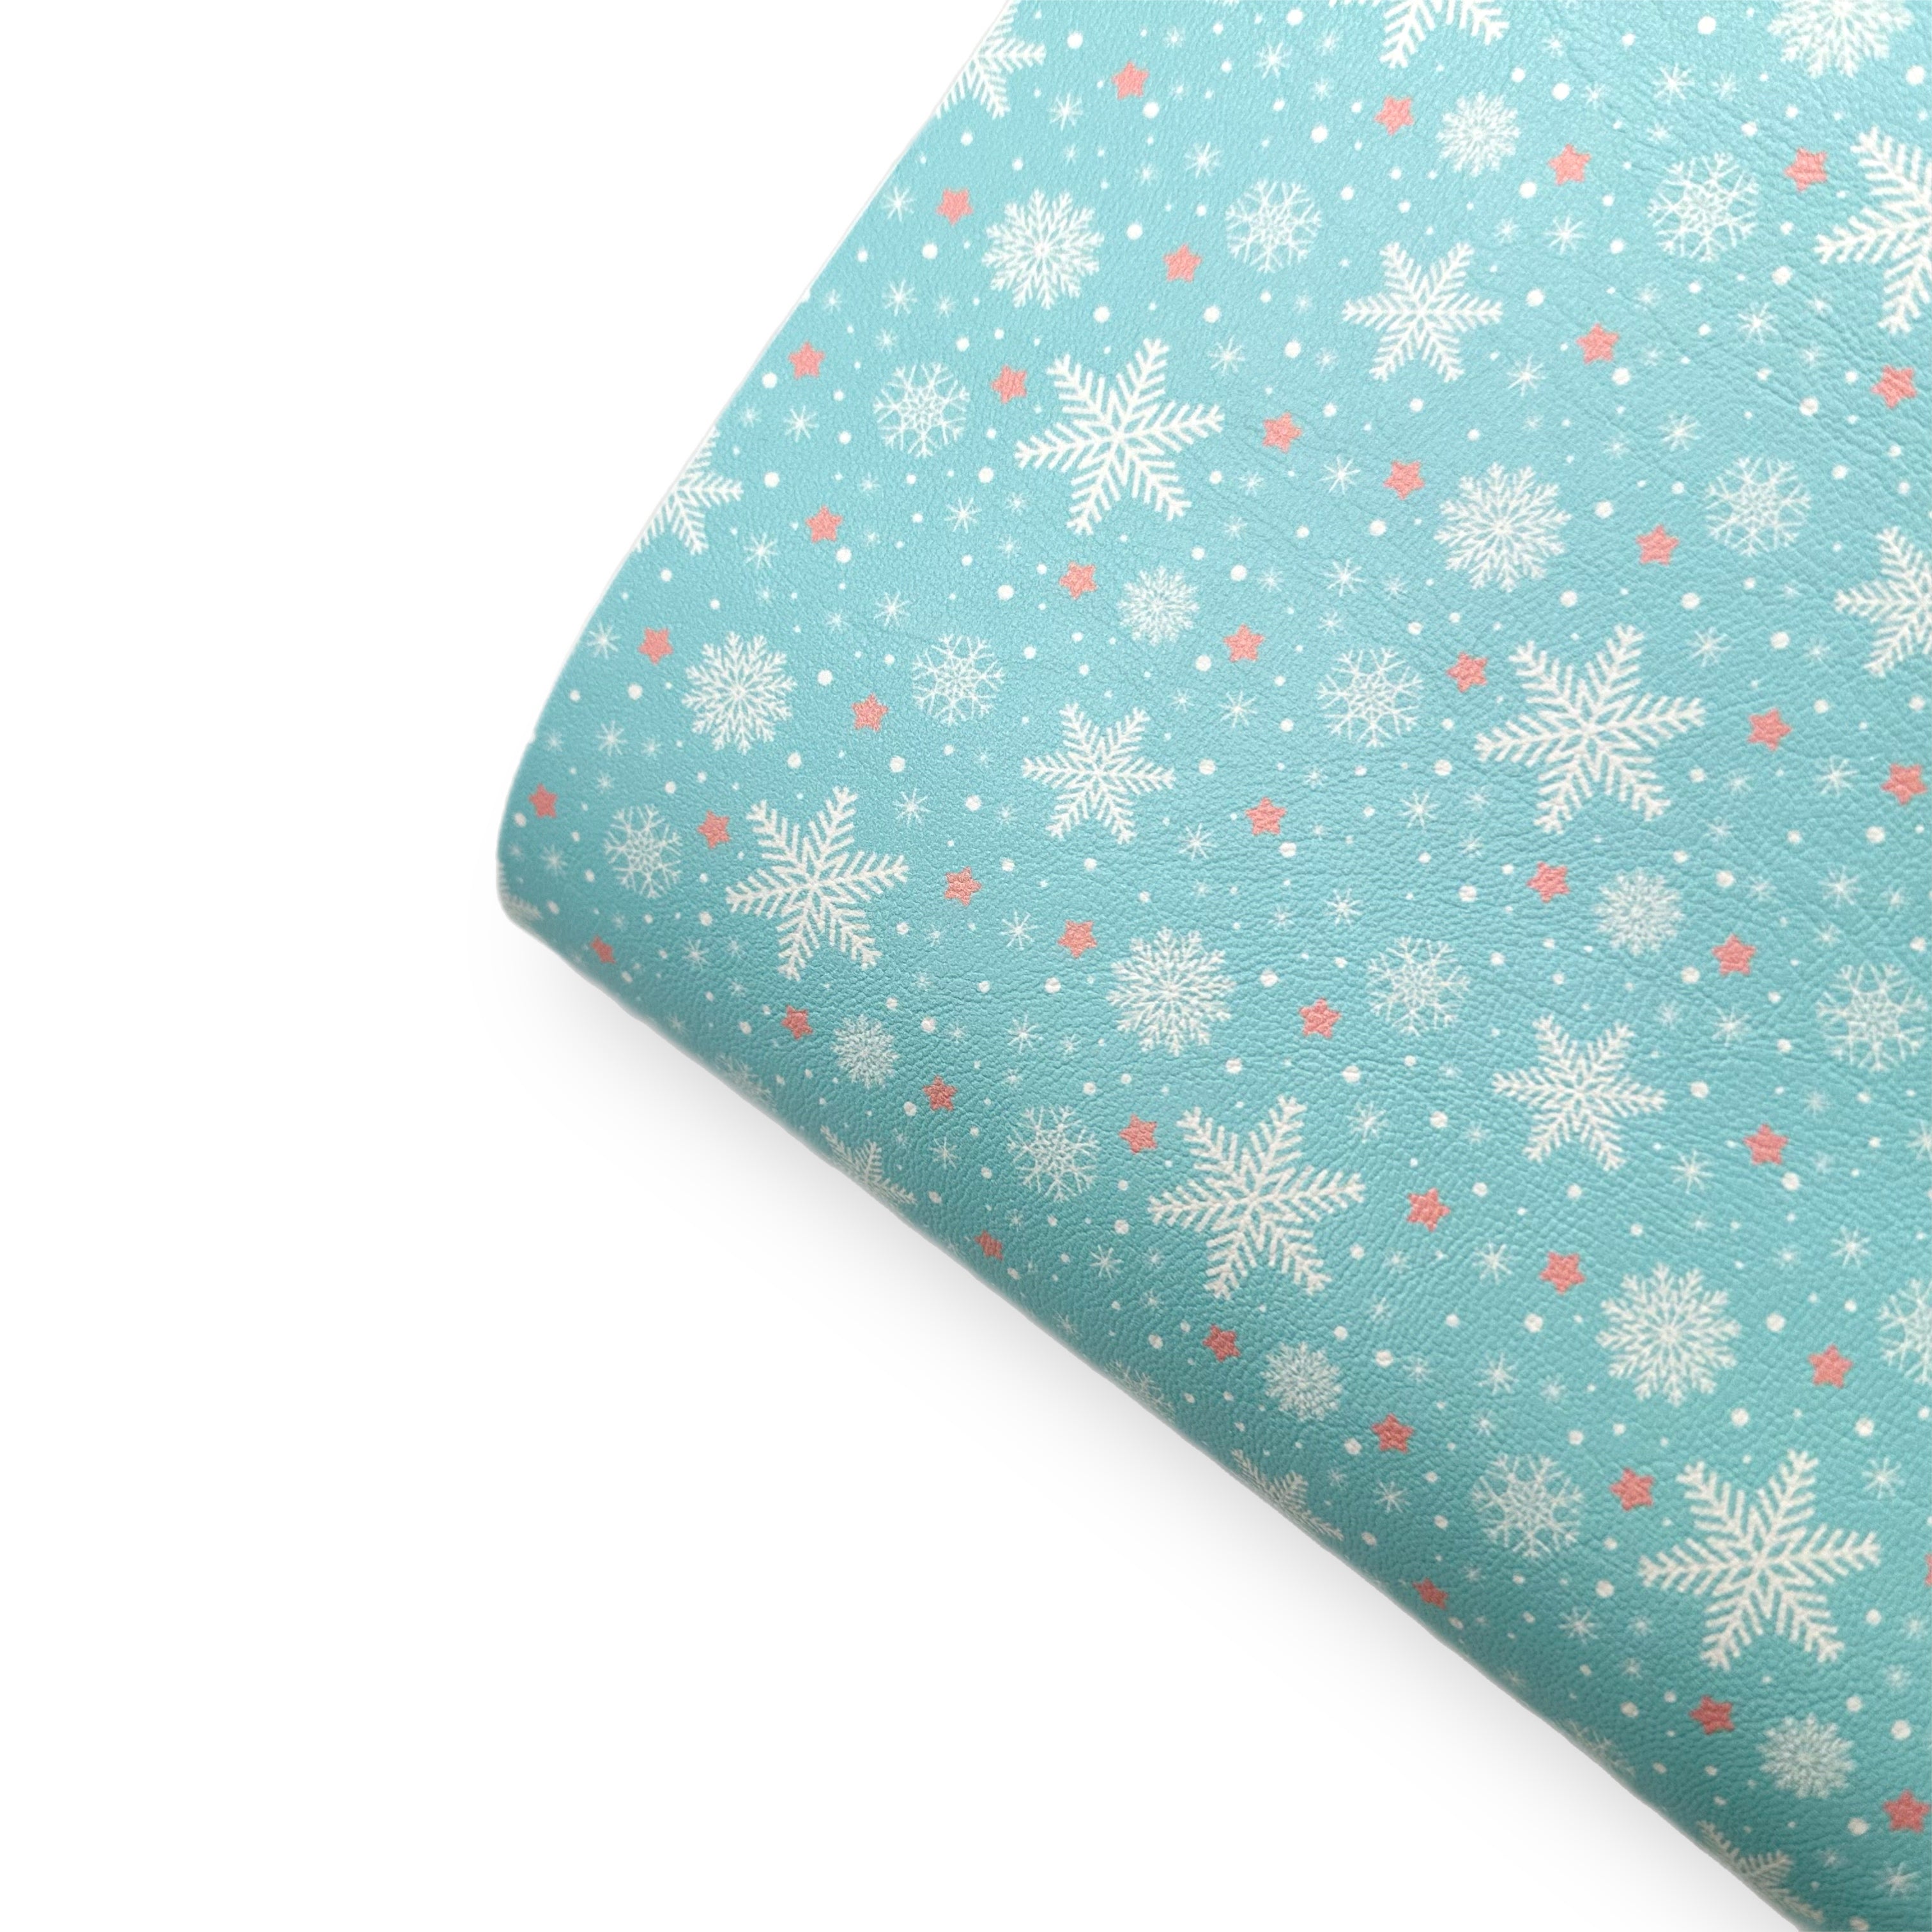 Frosty Snowflake Premium Faux Leather Fabric Sheets